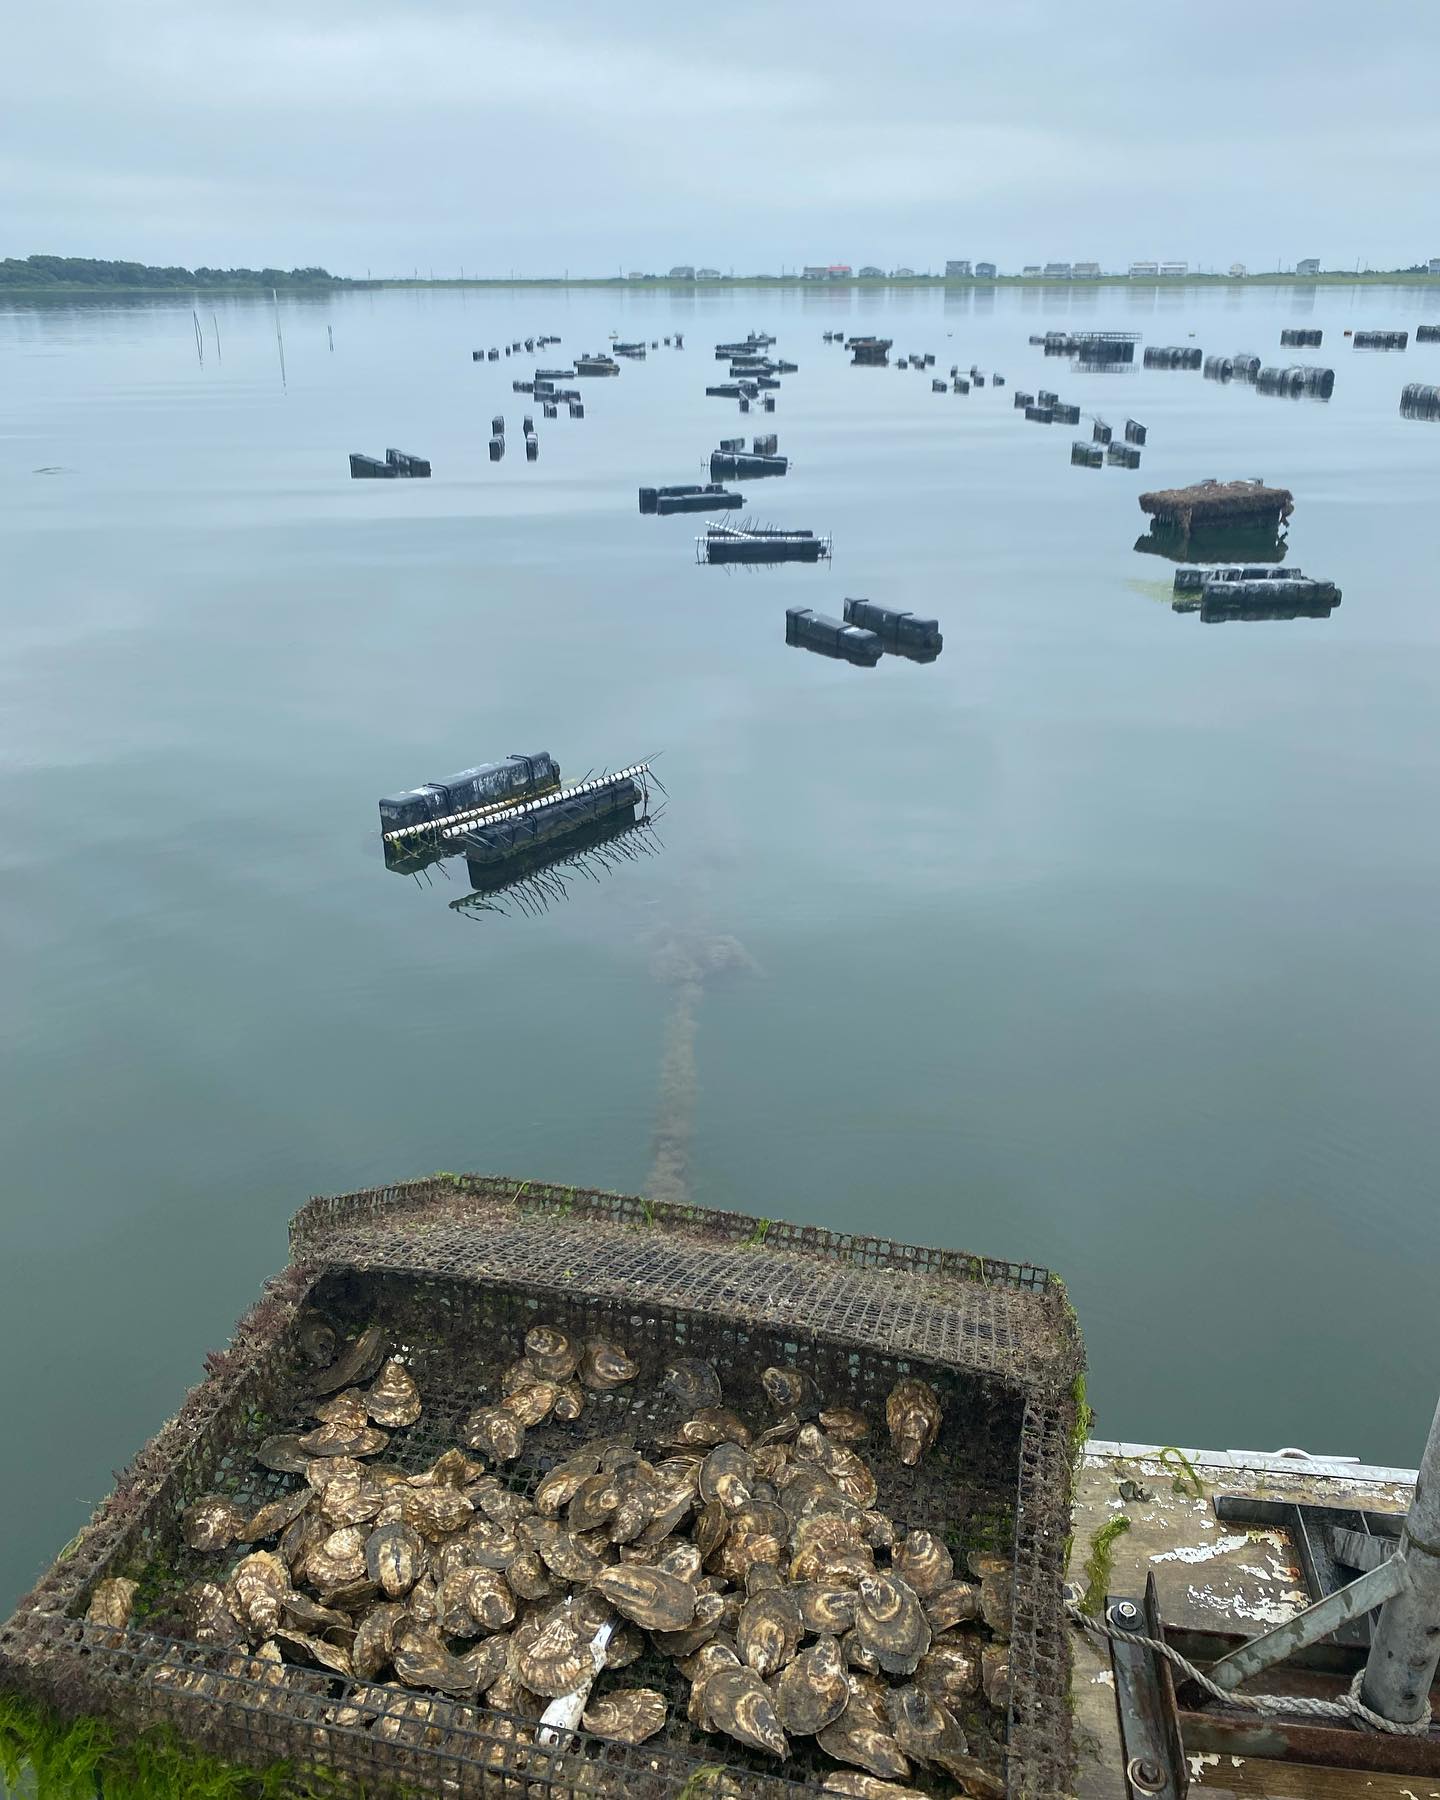 A view of the Whale Creek oyster farm with a bin of oysters on a boat in the foreground.